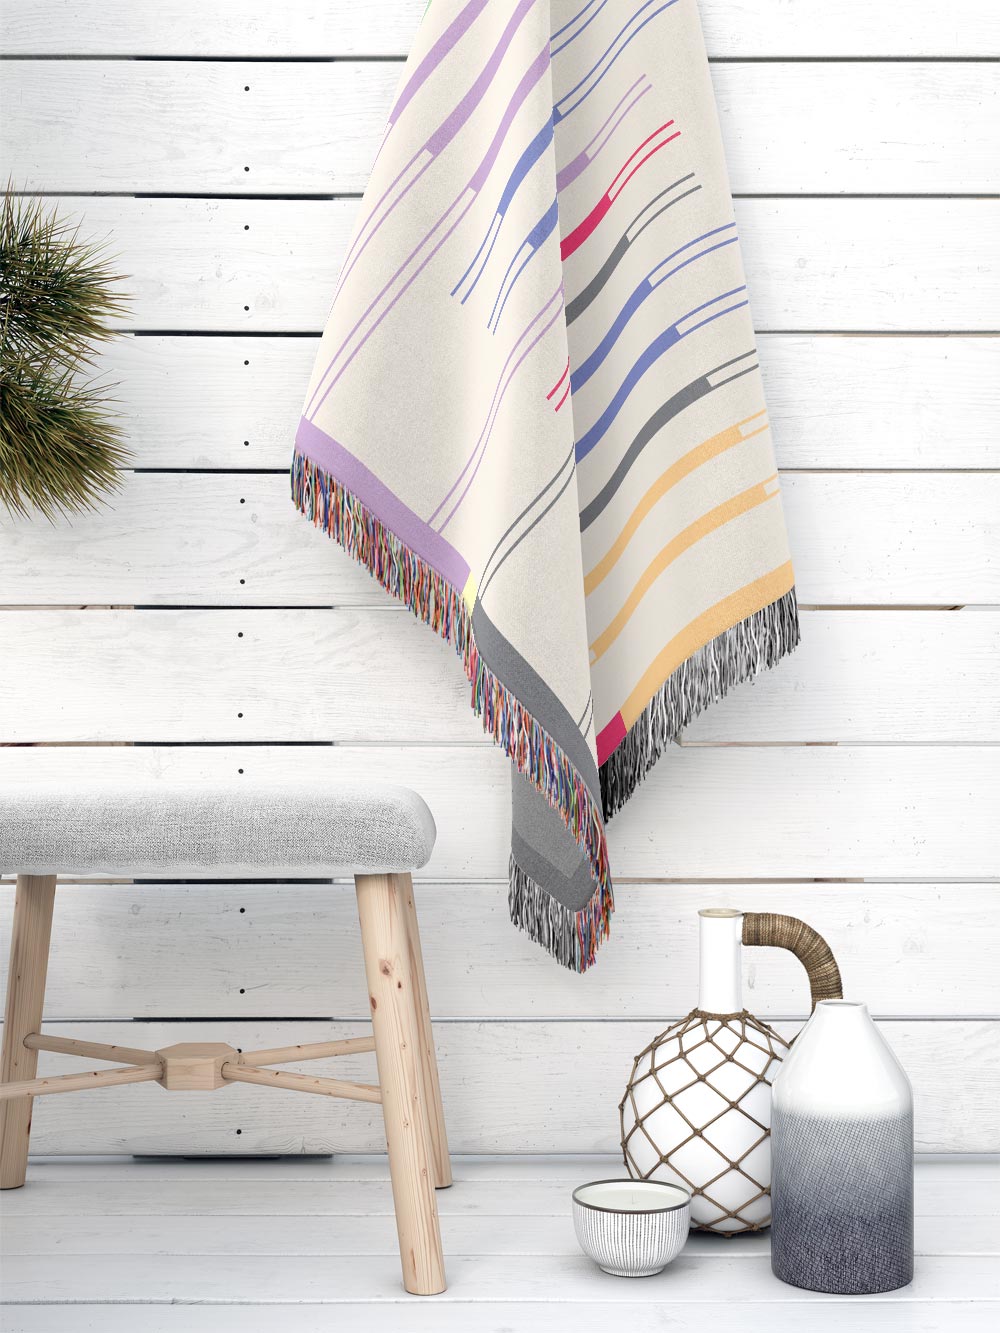 Fula I (dawn) – off-white woven throw blanket with colorful striped elements